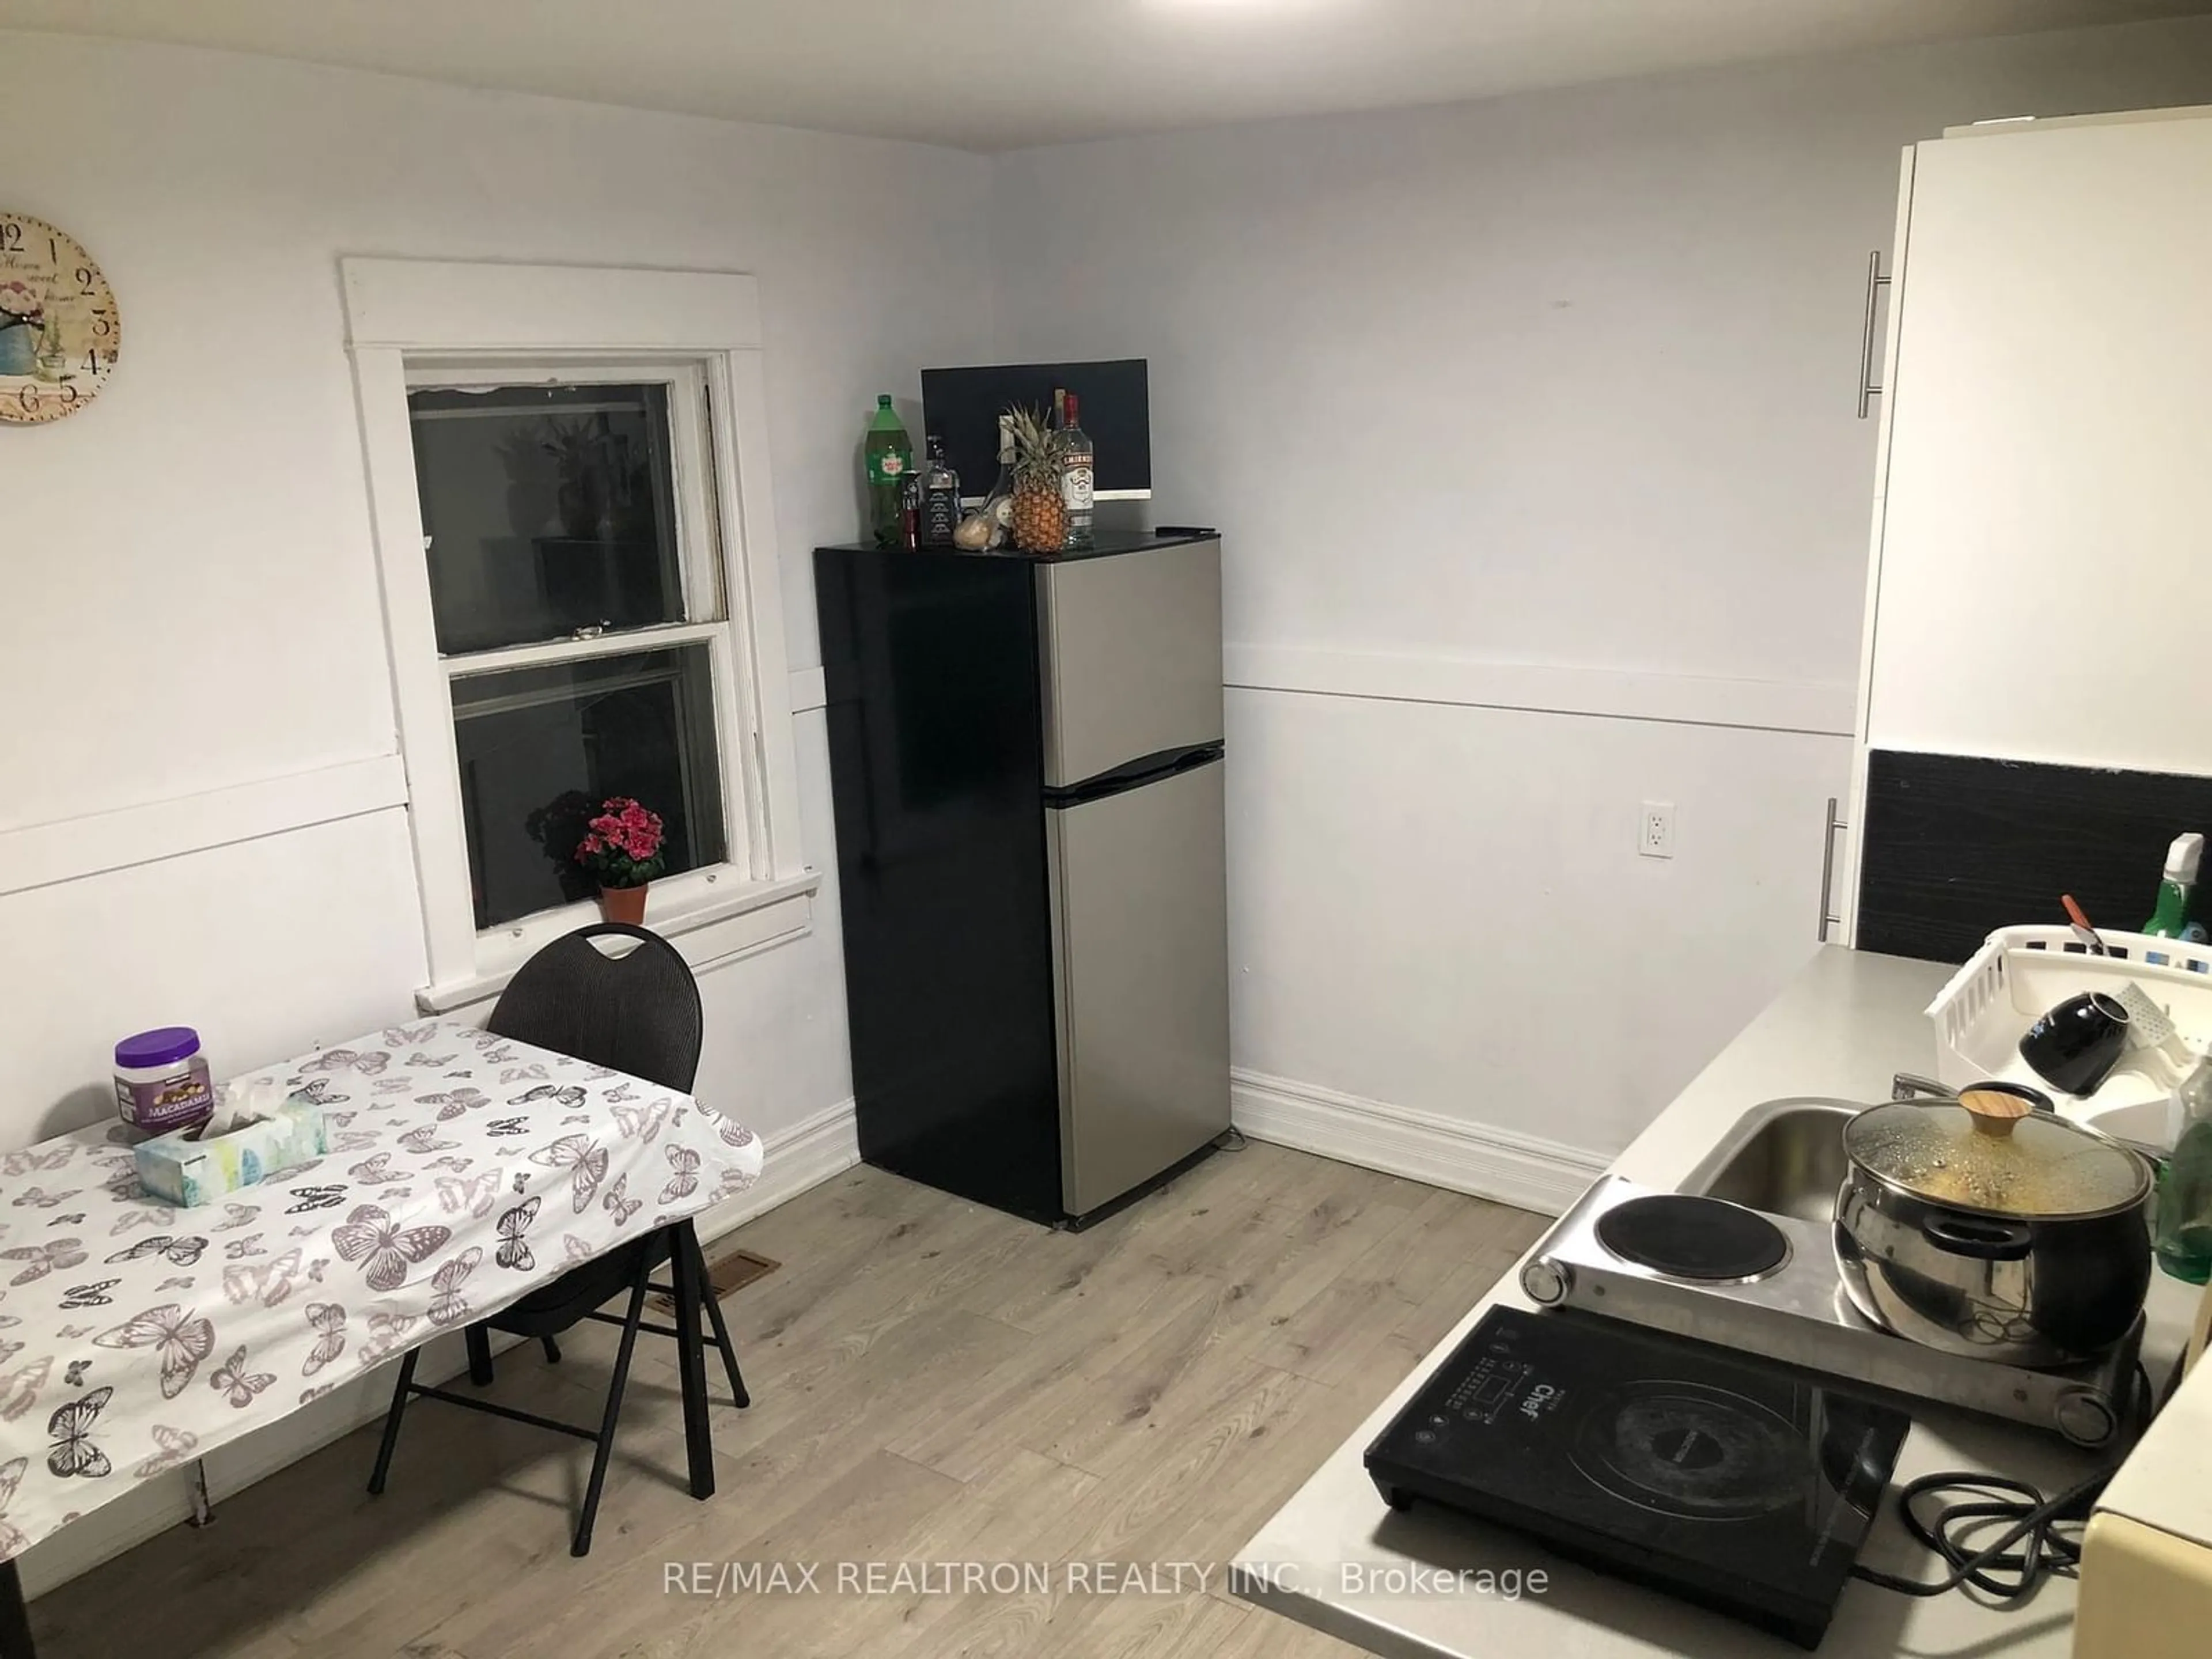 A pic of a room for 471 Vaughan Rd, Toronto Ontario M6C 2P5